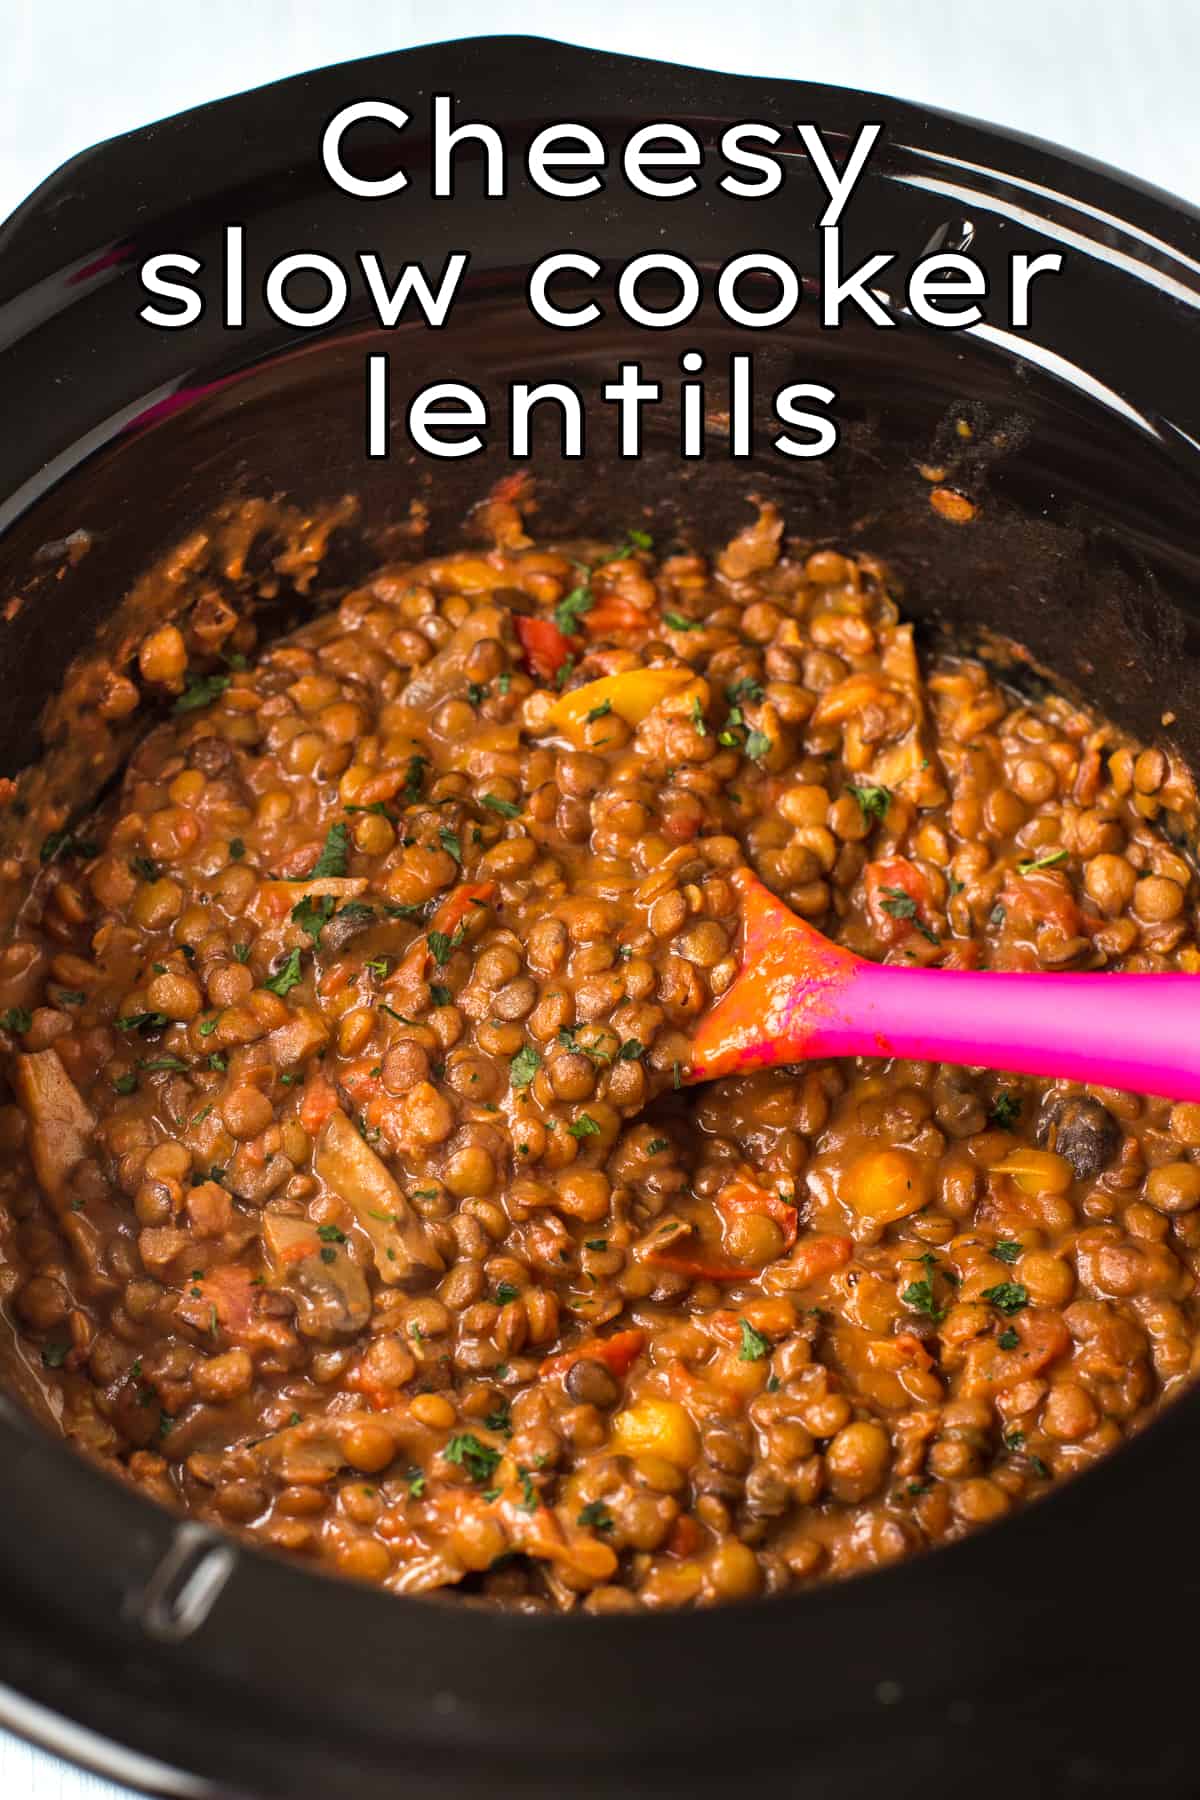 Cheesy lentils in a slow cooker.